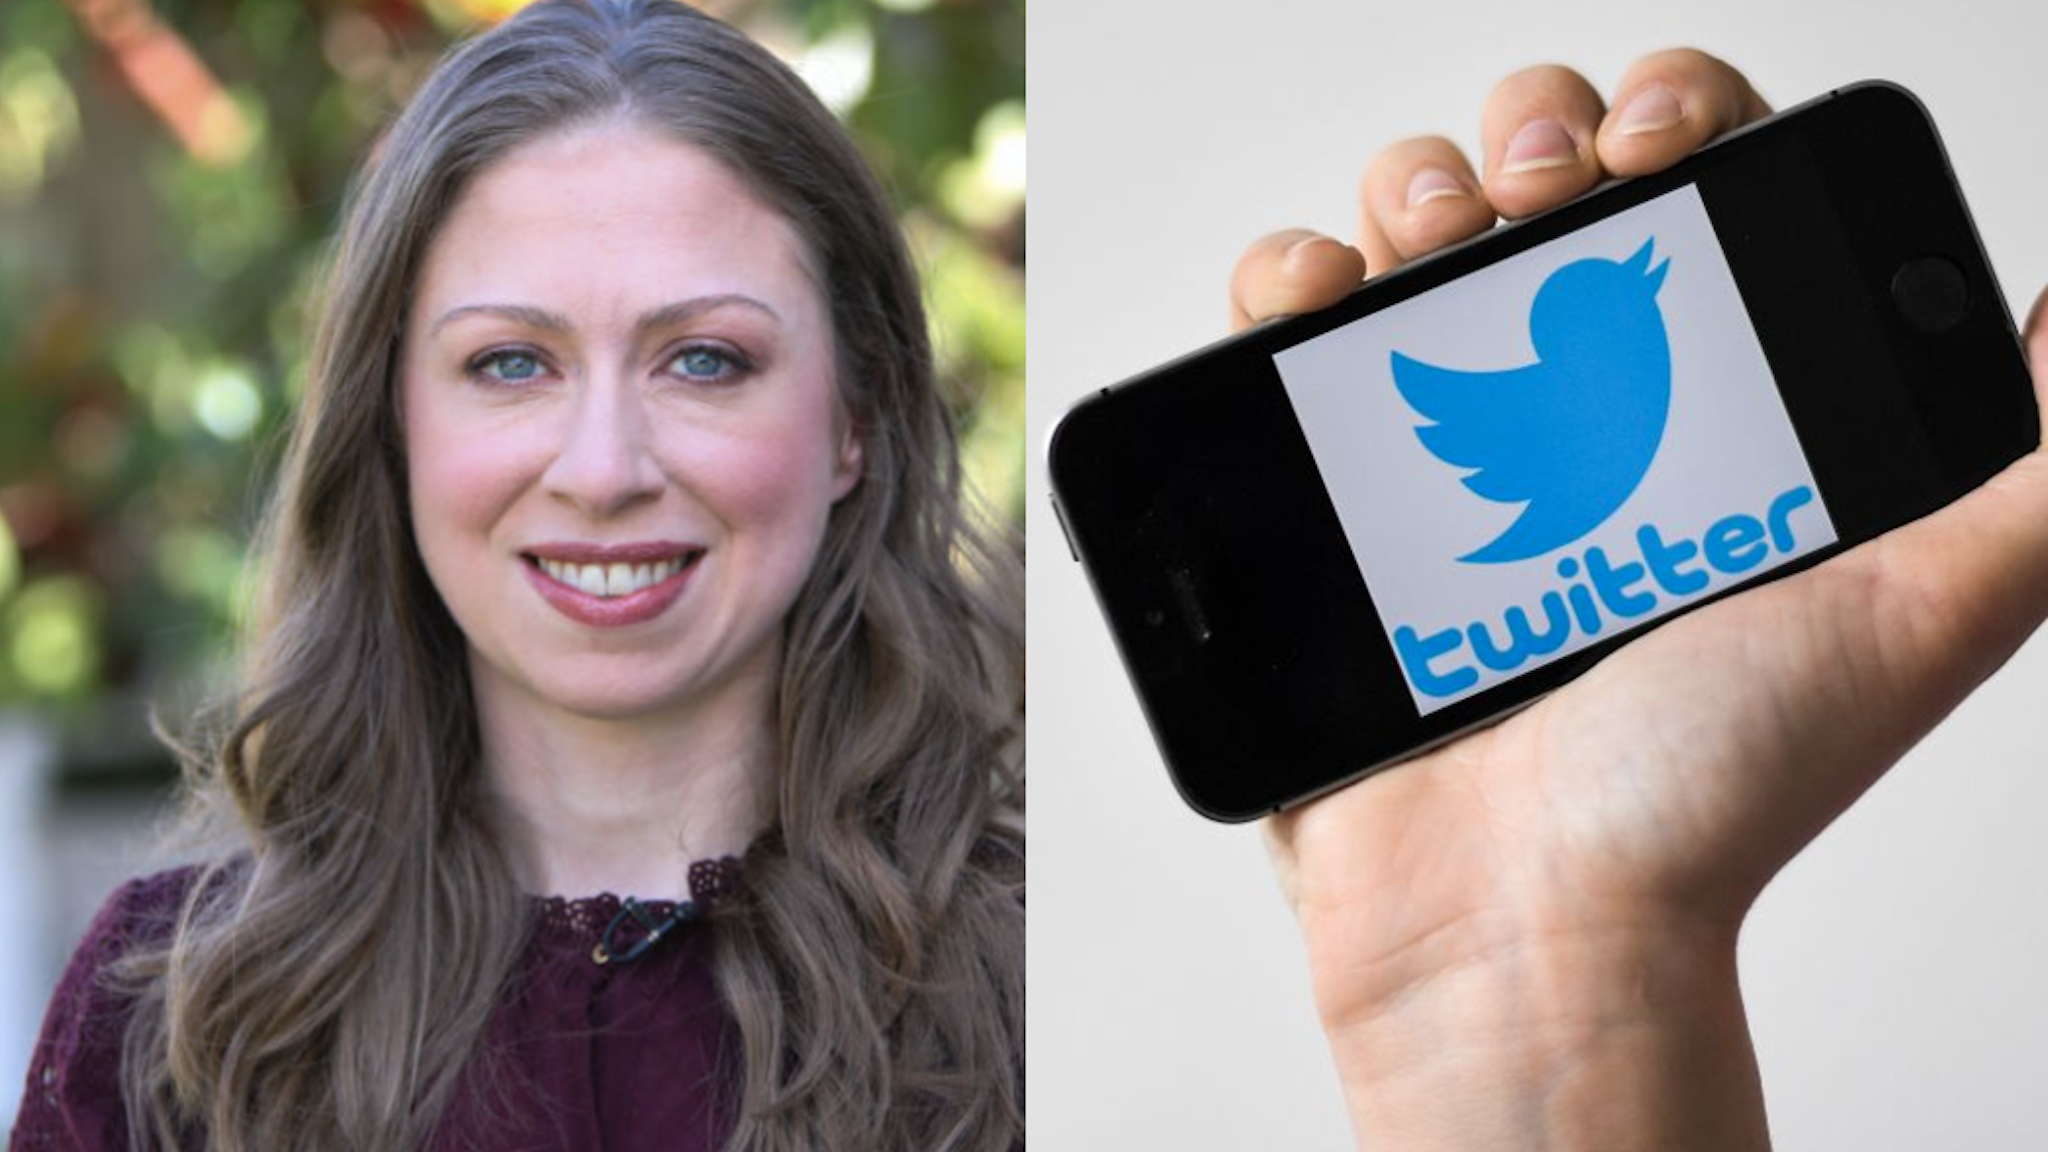 Chelsea Clinton visits Hallmark's "Home & Family" at Universal Studios Hollywood on October 9, 2018 in Universal City, California.//A woman shows a smartphone with the logo of US social network Twitter, on May 2, 2019 in Nantes, western France.